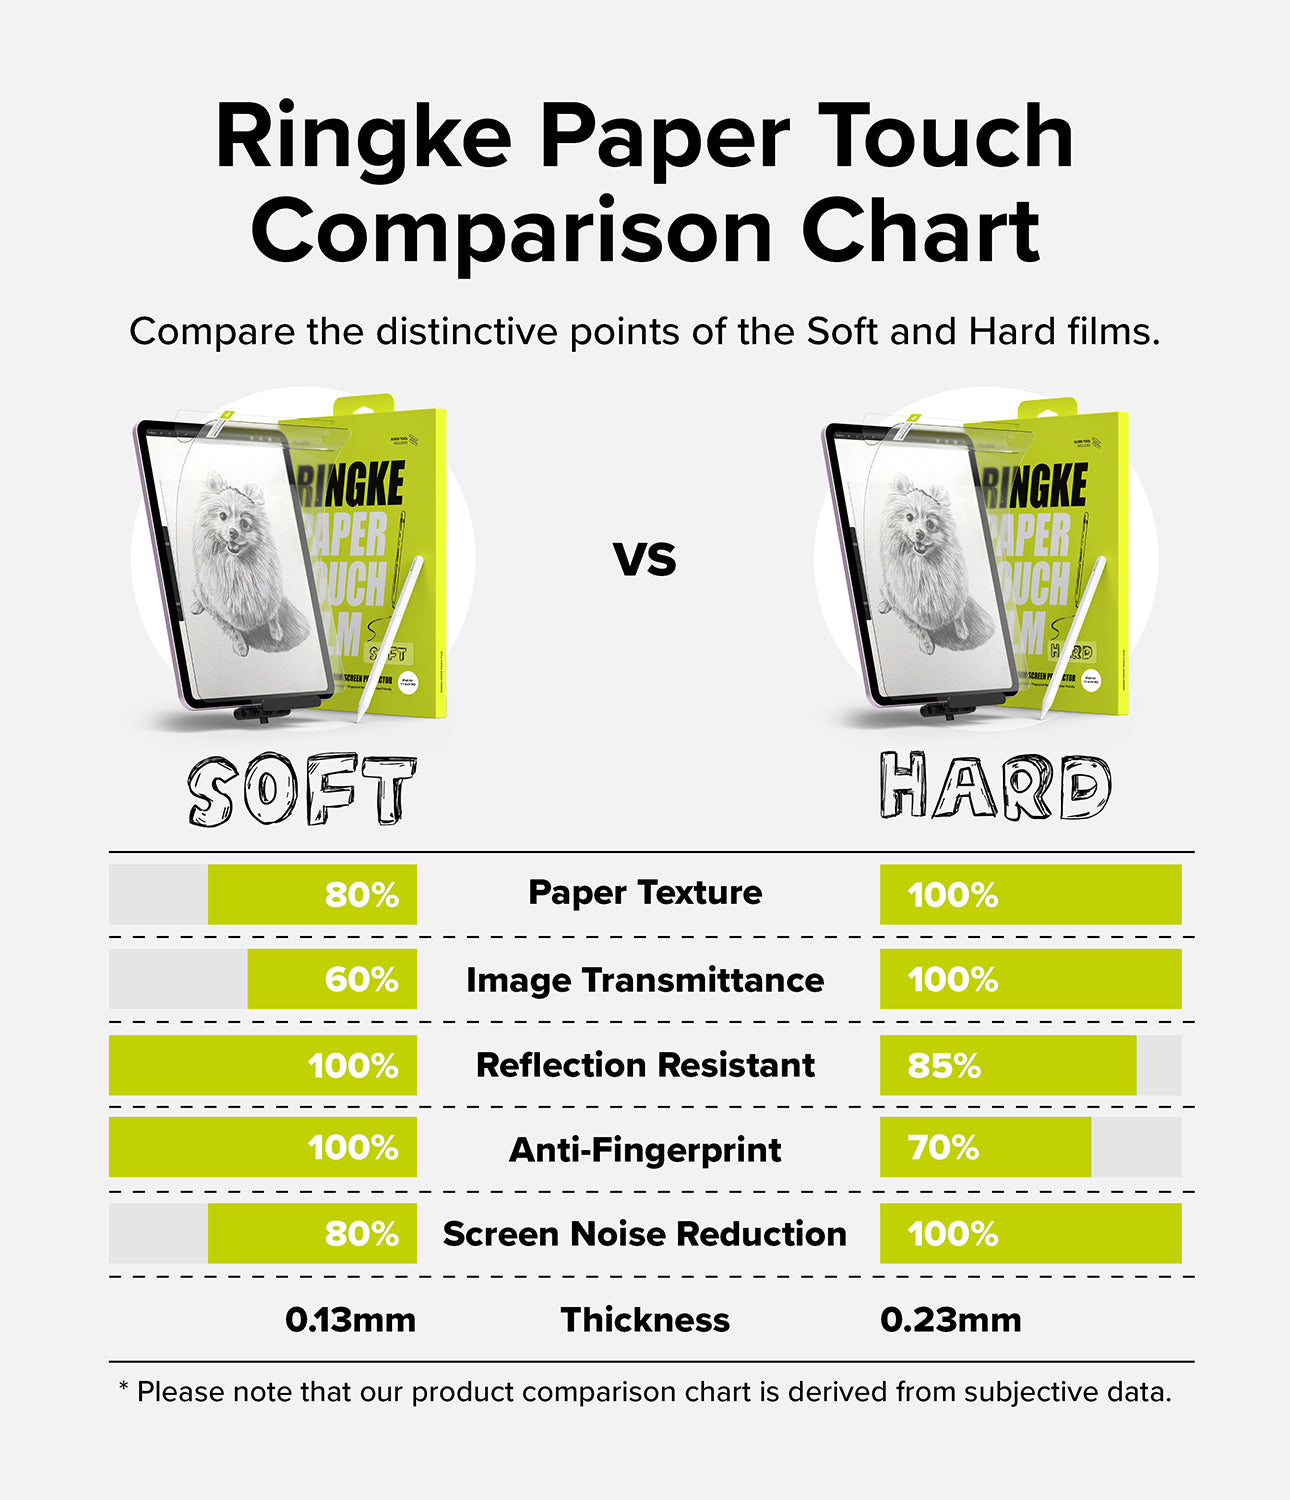 iPad Air 11" (M2) Screen Protector | Paper Touch Film - Hard - Ringke Paper Touch Comparison Chart. Compare the distinctive points of the Soft and Hard films.